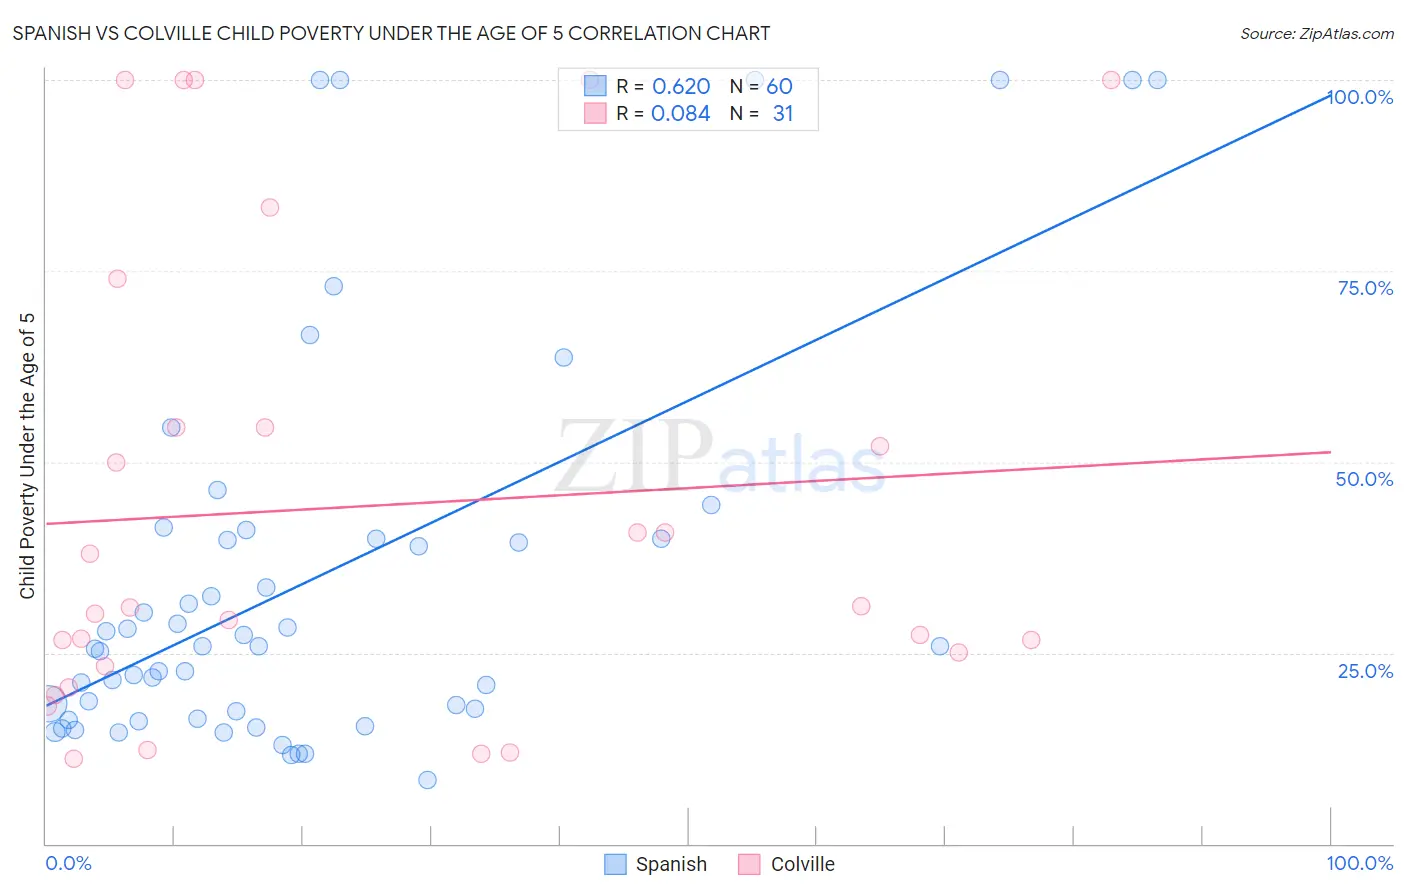 Spanish vs Colville Child Poverty Under the Age of 5